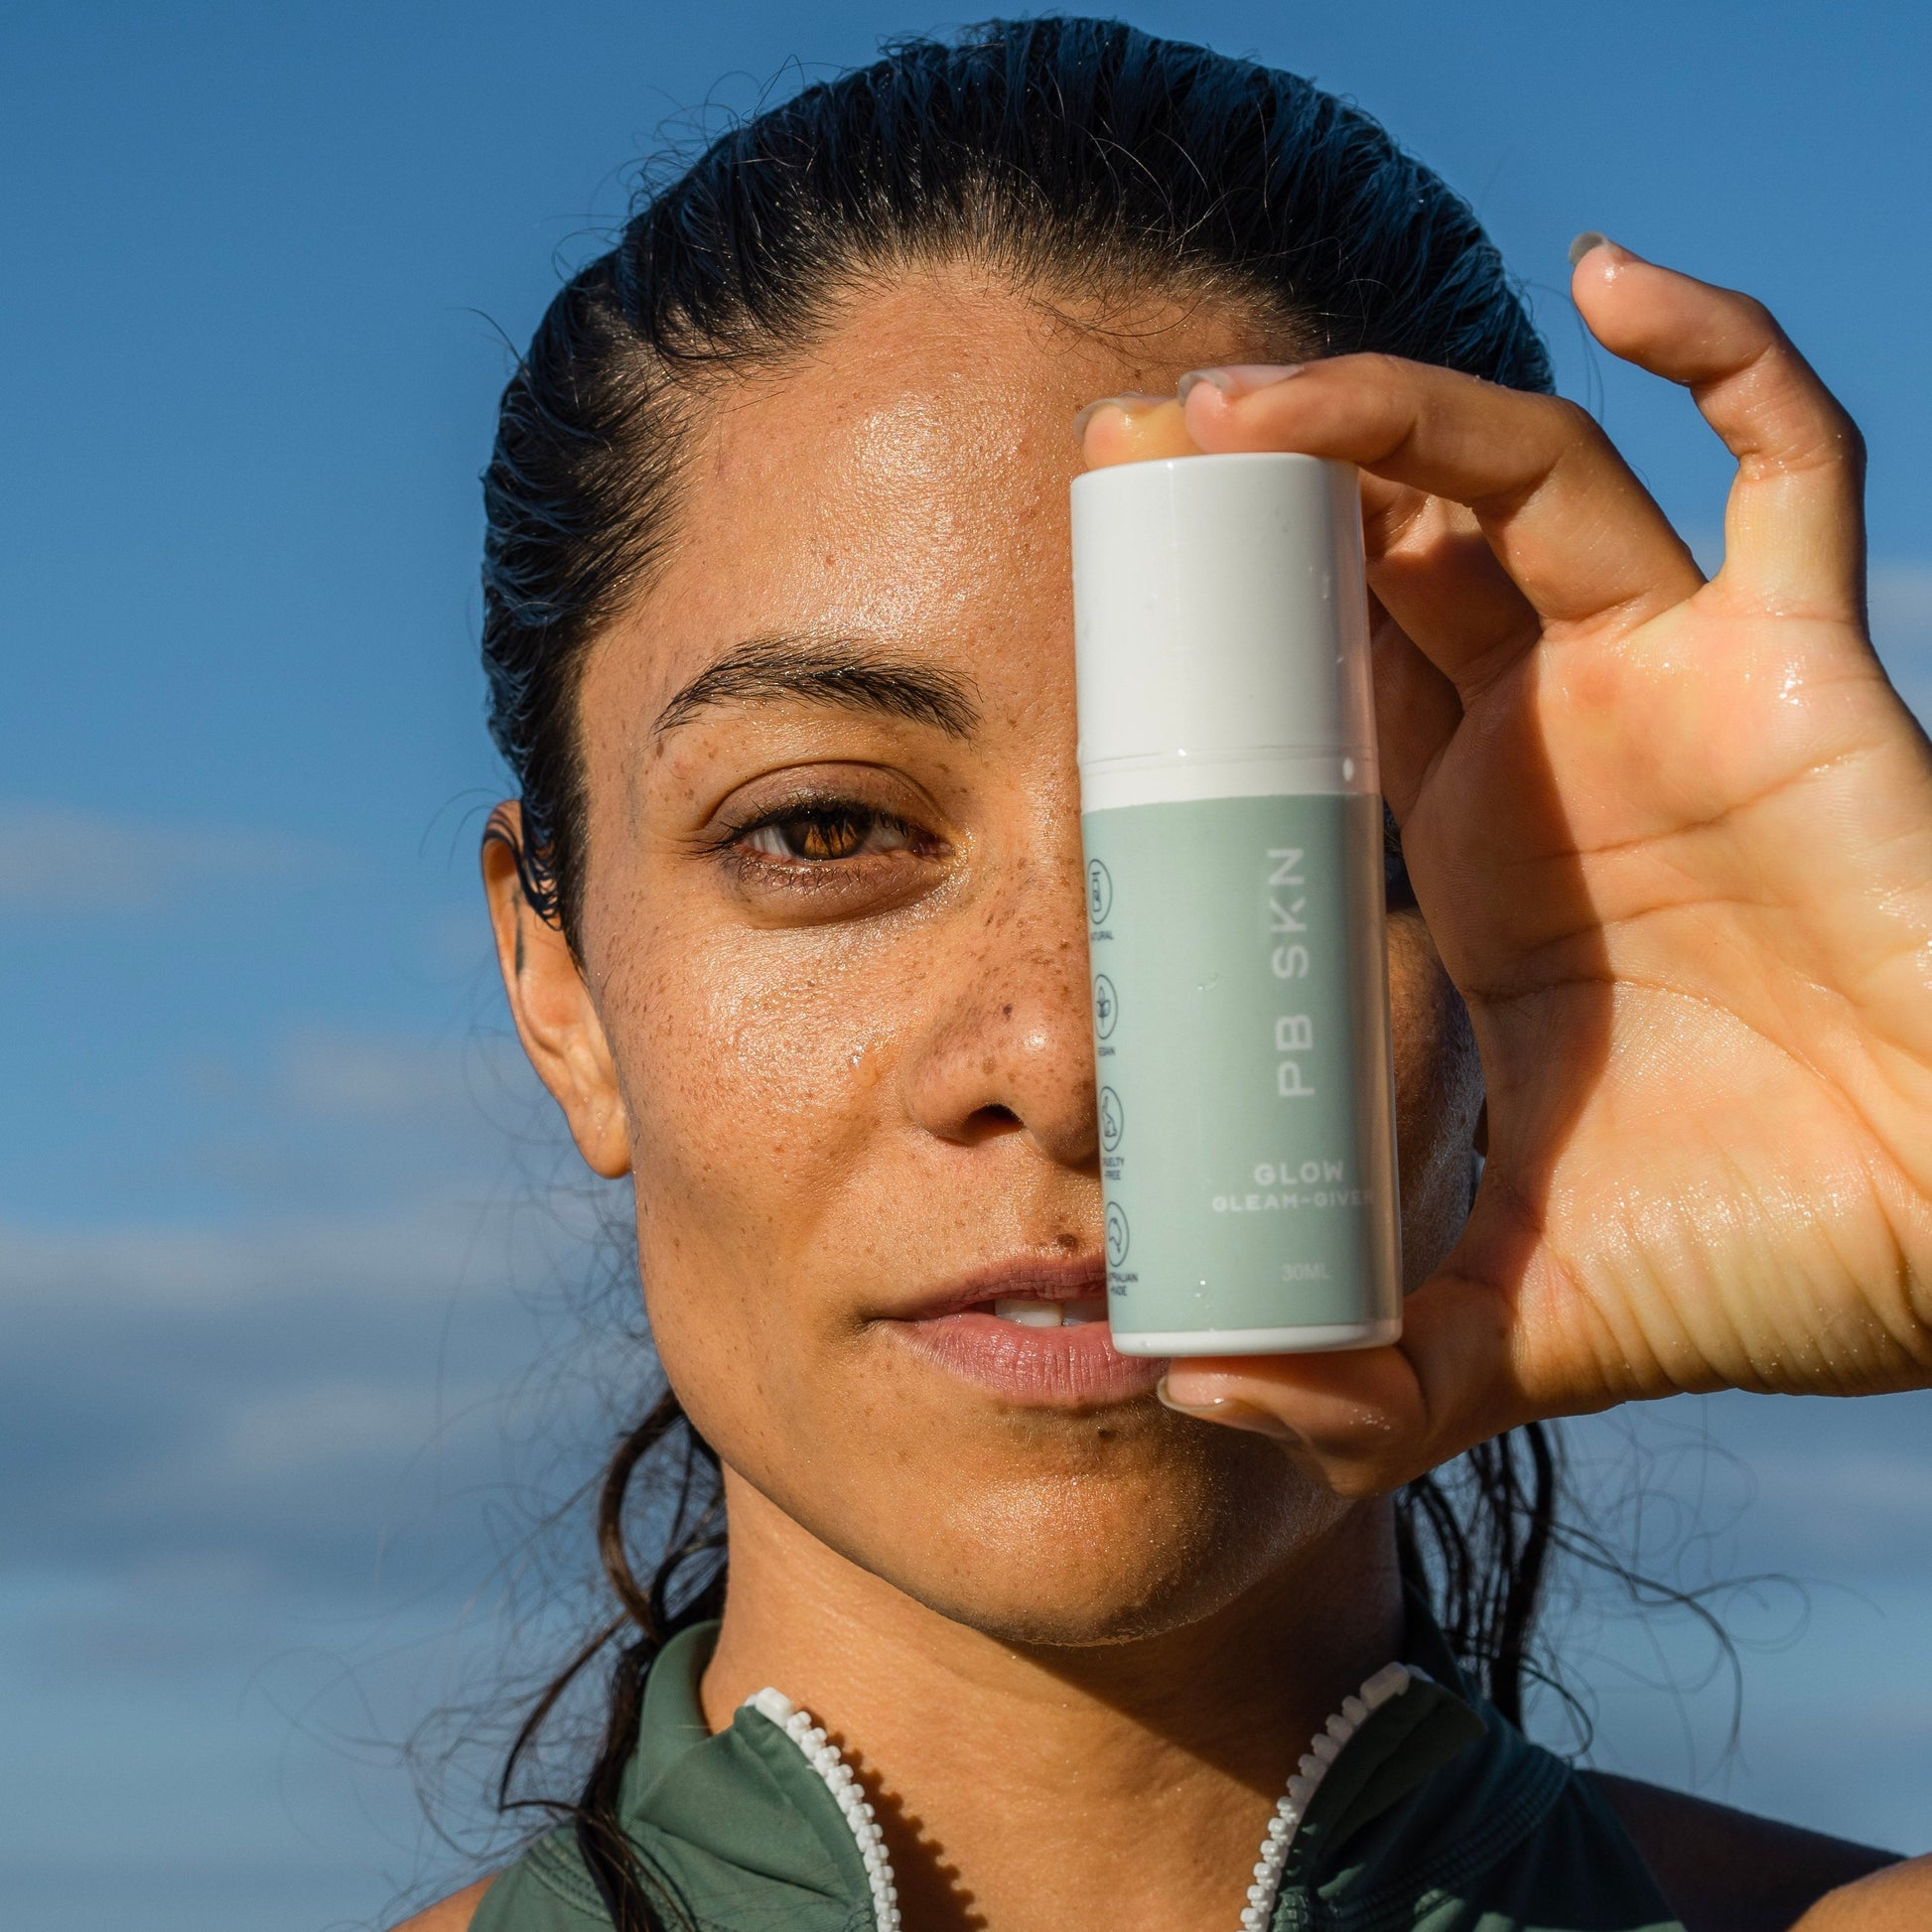 Woman holding PB SKN Glow brightening post-workout skincare serum at beach after exercise